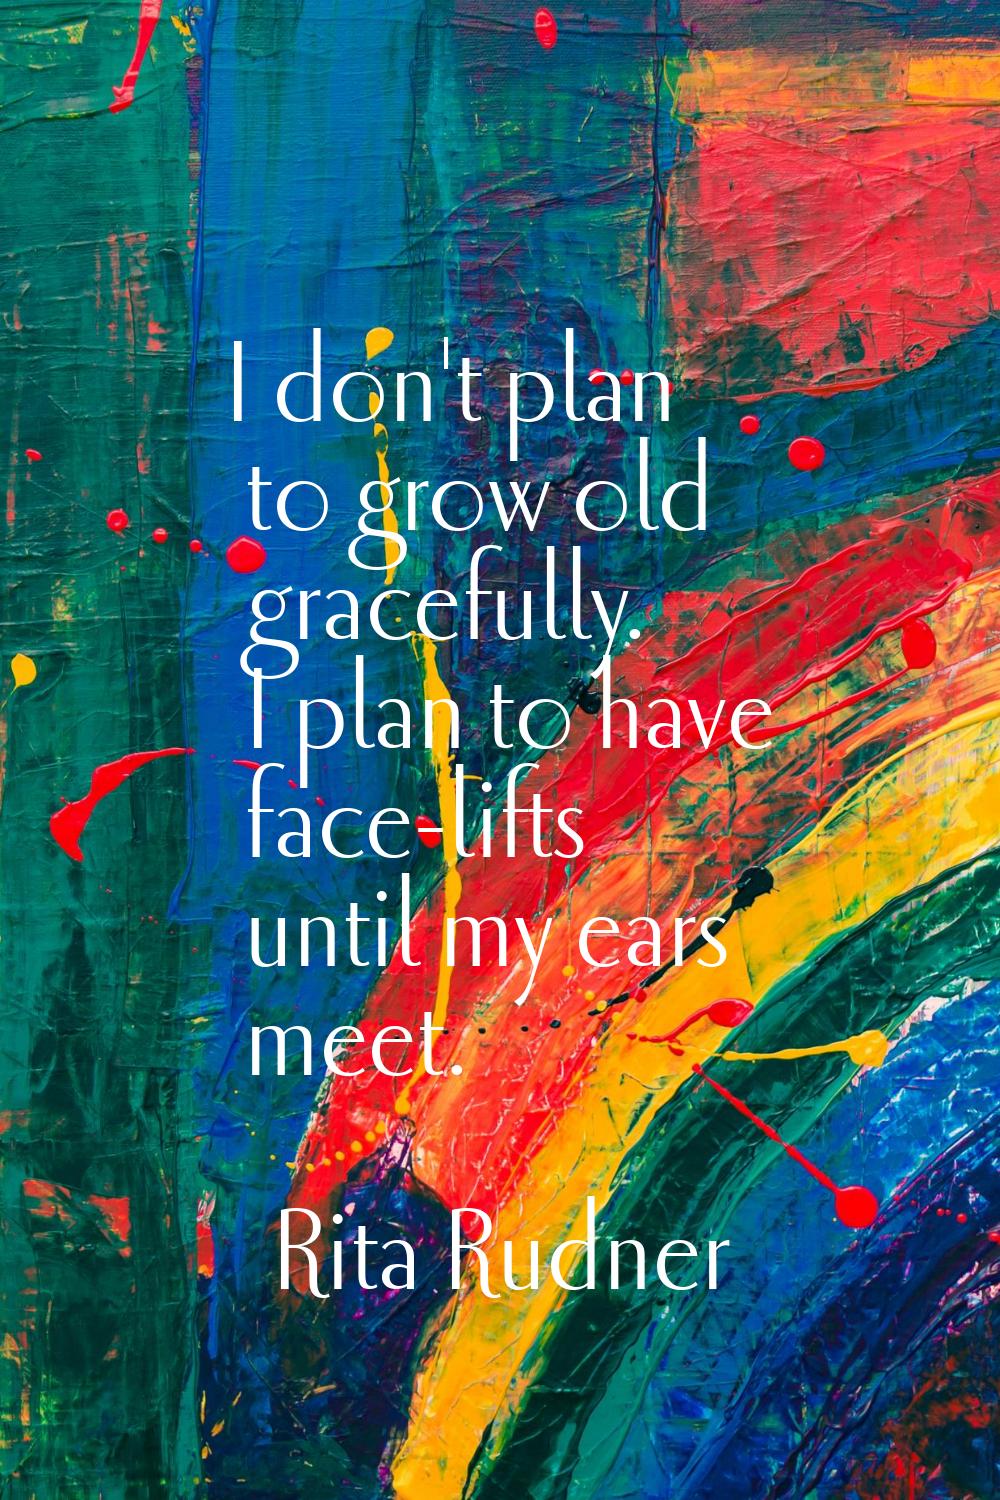 I don't plan to grow old gracefully. I plan to have face-lifts until my ears meet.